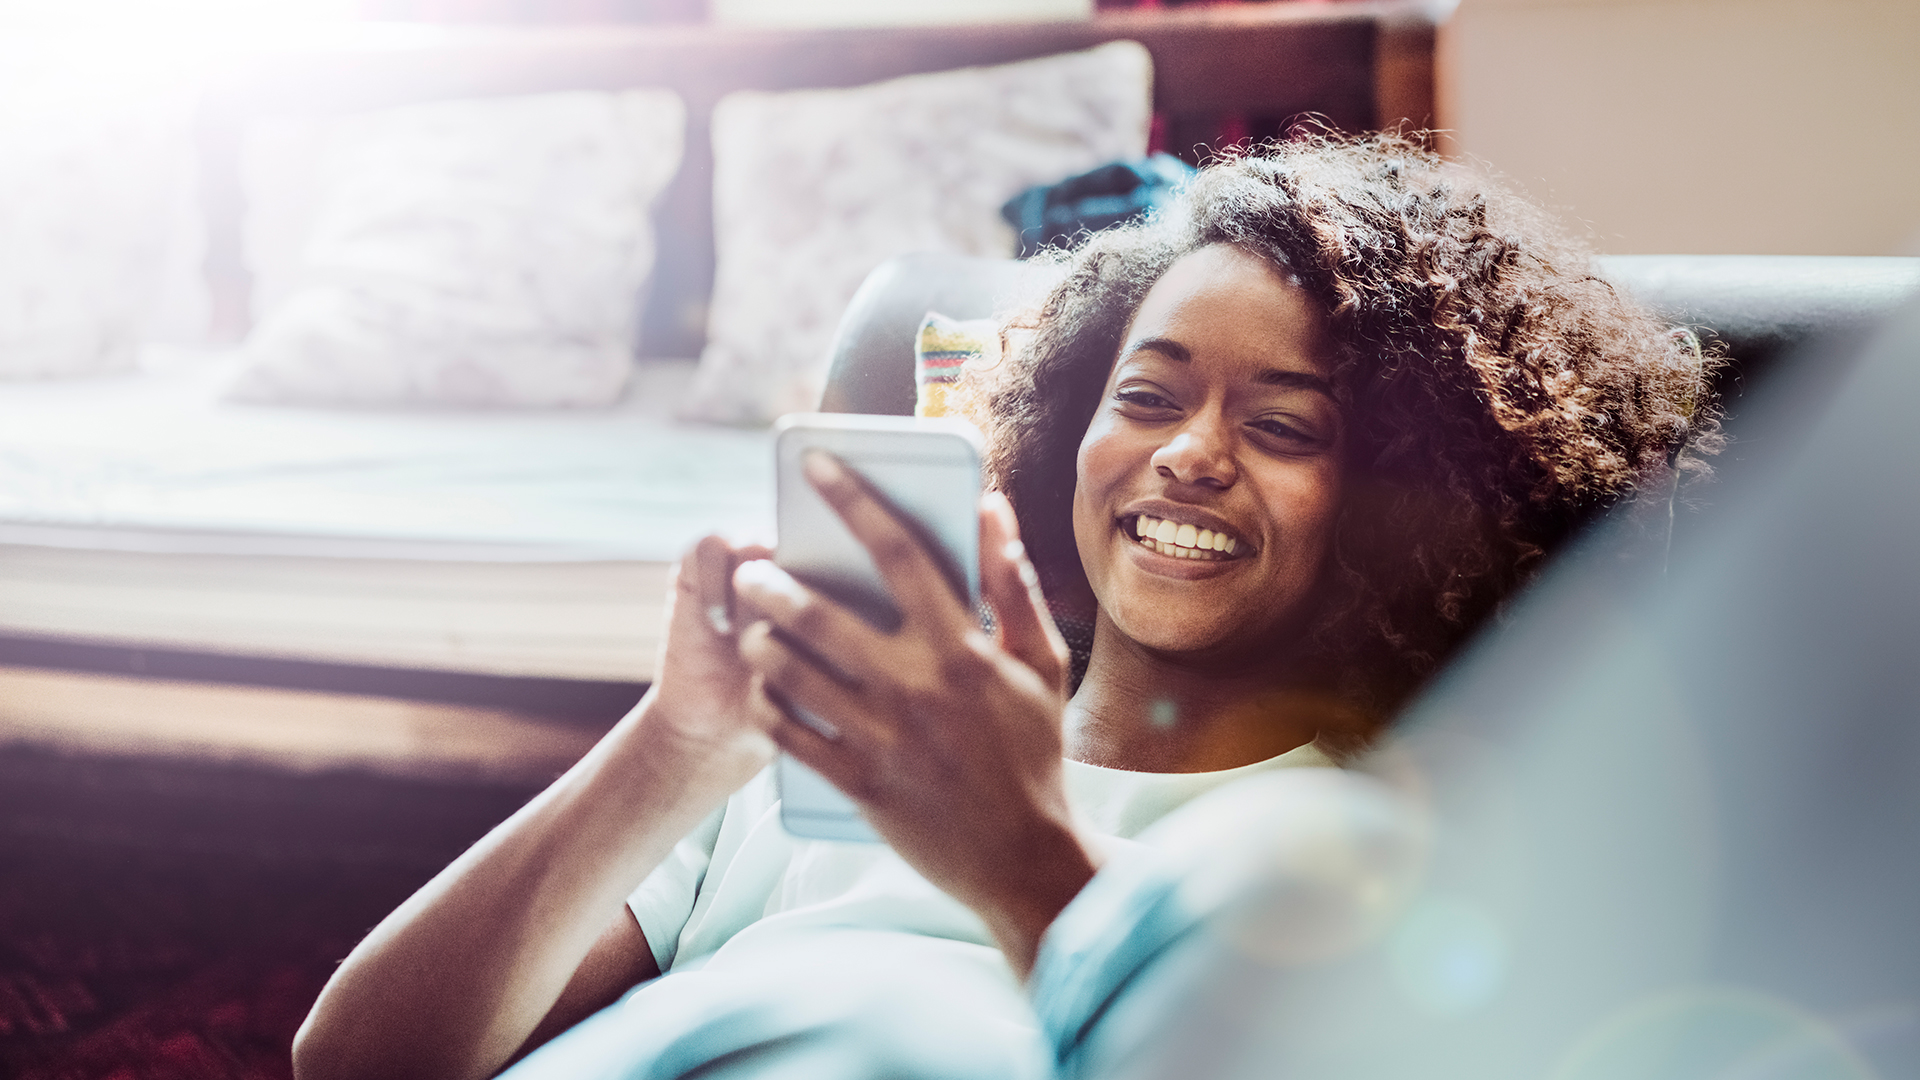 girl on couch smiling looking at mobile phone| AdvancedMD